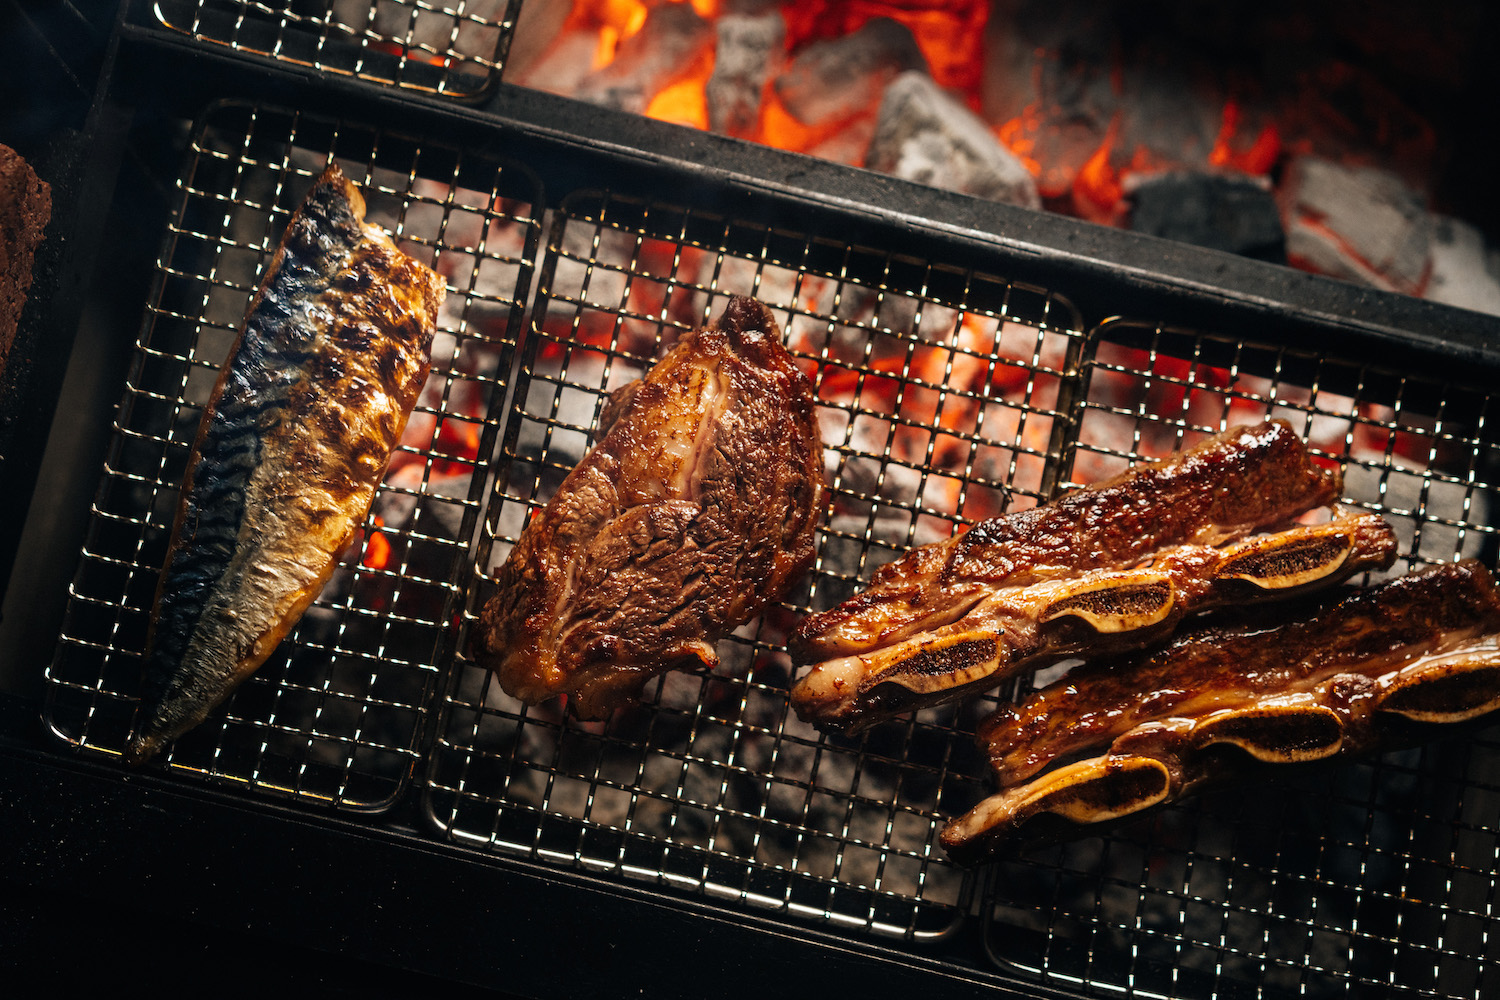 Pacific Mackerel Fillet, Prime Beef Rib Cap, House Double-Cut Galbi on the Grill